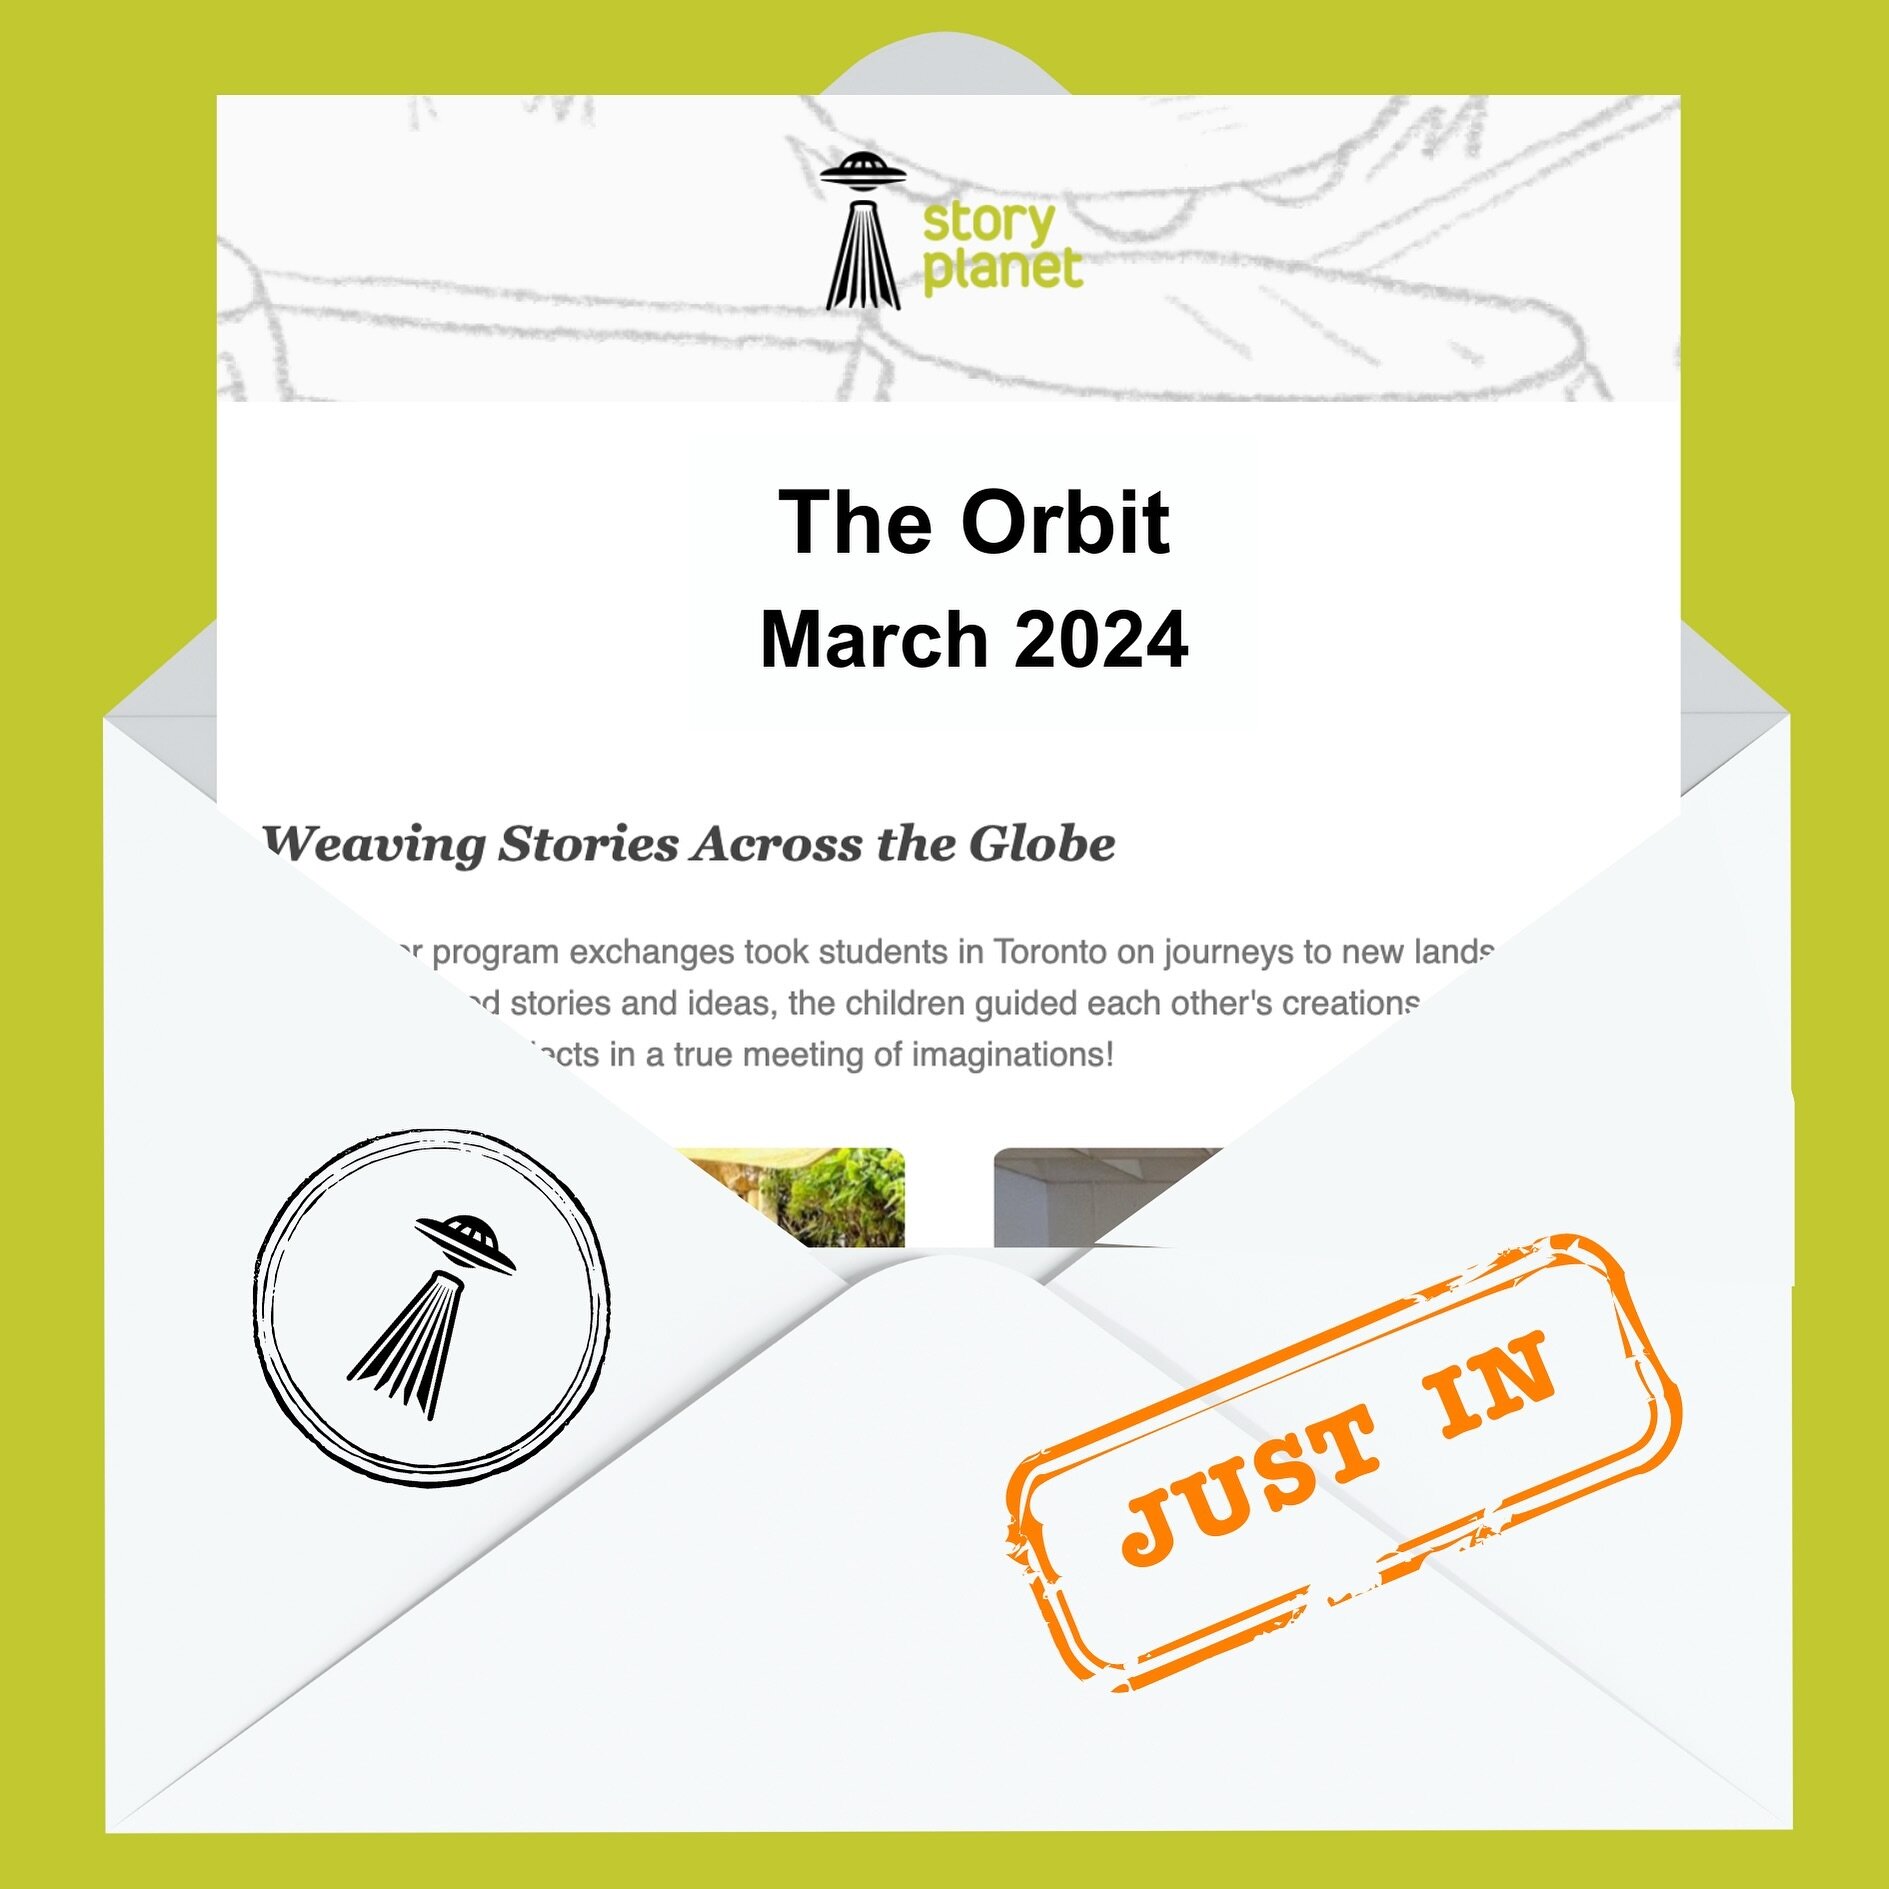 It&rsquo;s true&mdash;this month&rsquo;s &ldquo;The Orbit&rdquo; just hit inboxes everywhere!

Read all about Story Planet in Nairobi🇰🇪 &amp; Other March News at our link in bio.